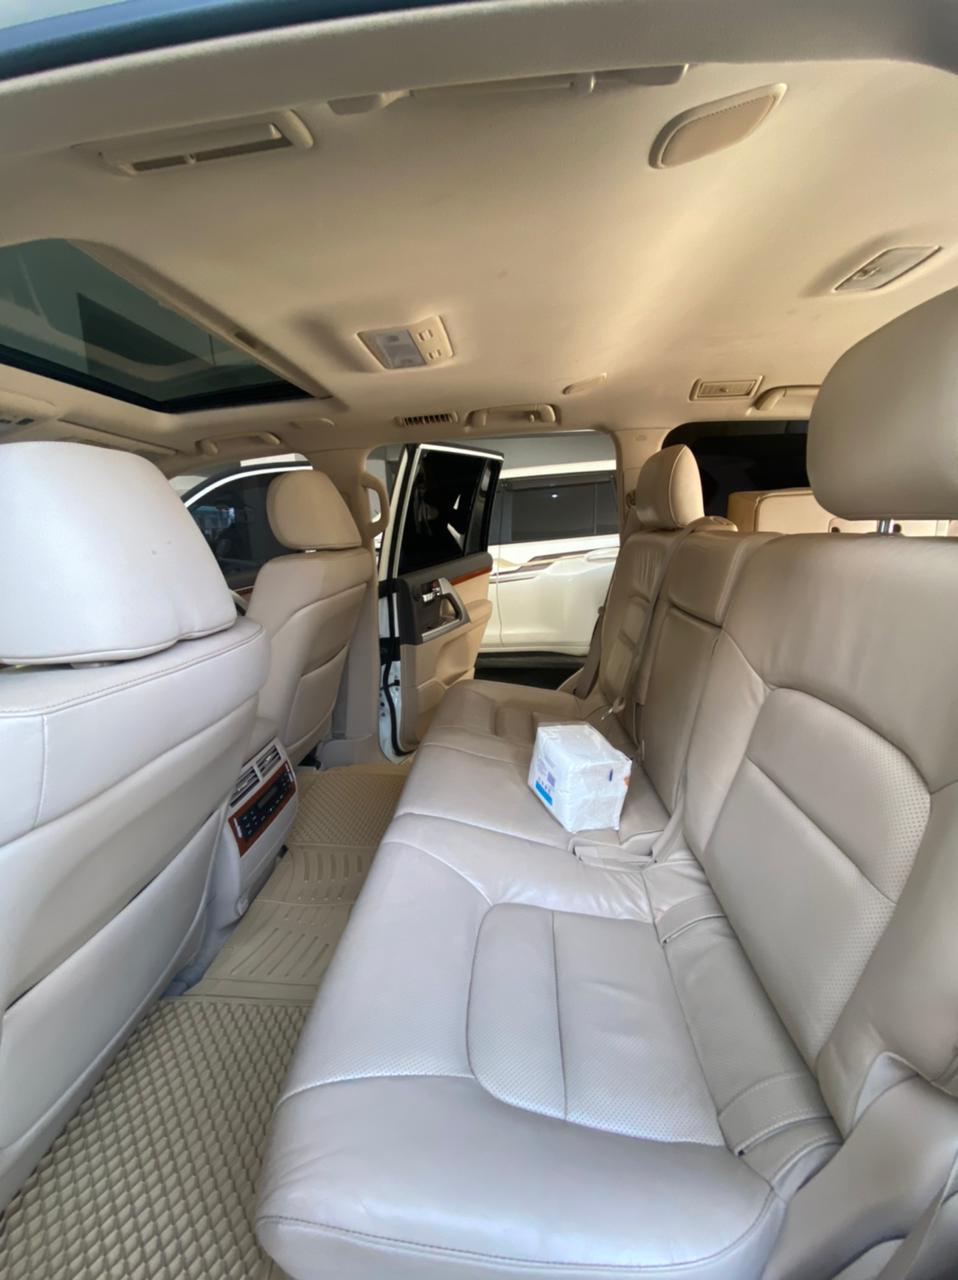 Zx Toyota Landcruiser Asian Owner Sunroof Leather Trade in OK As NEW 2012